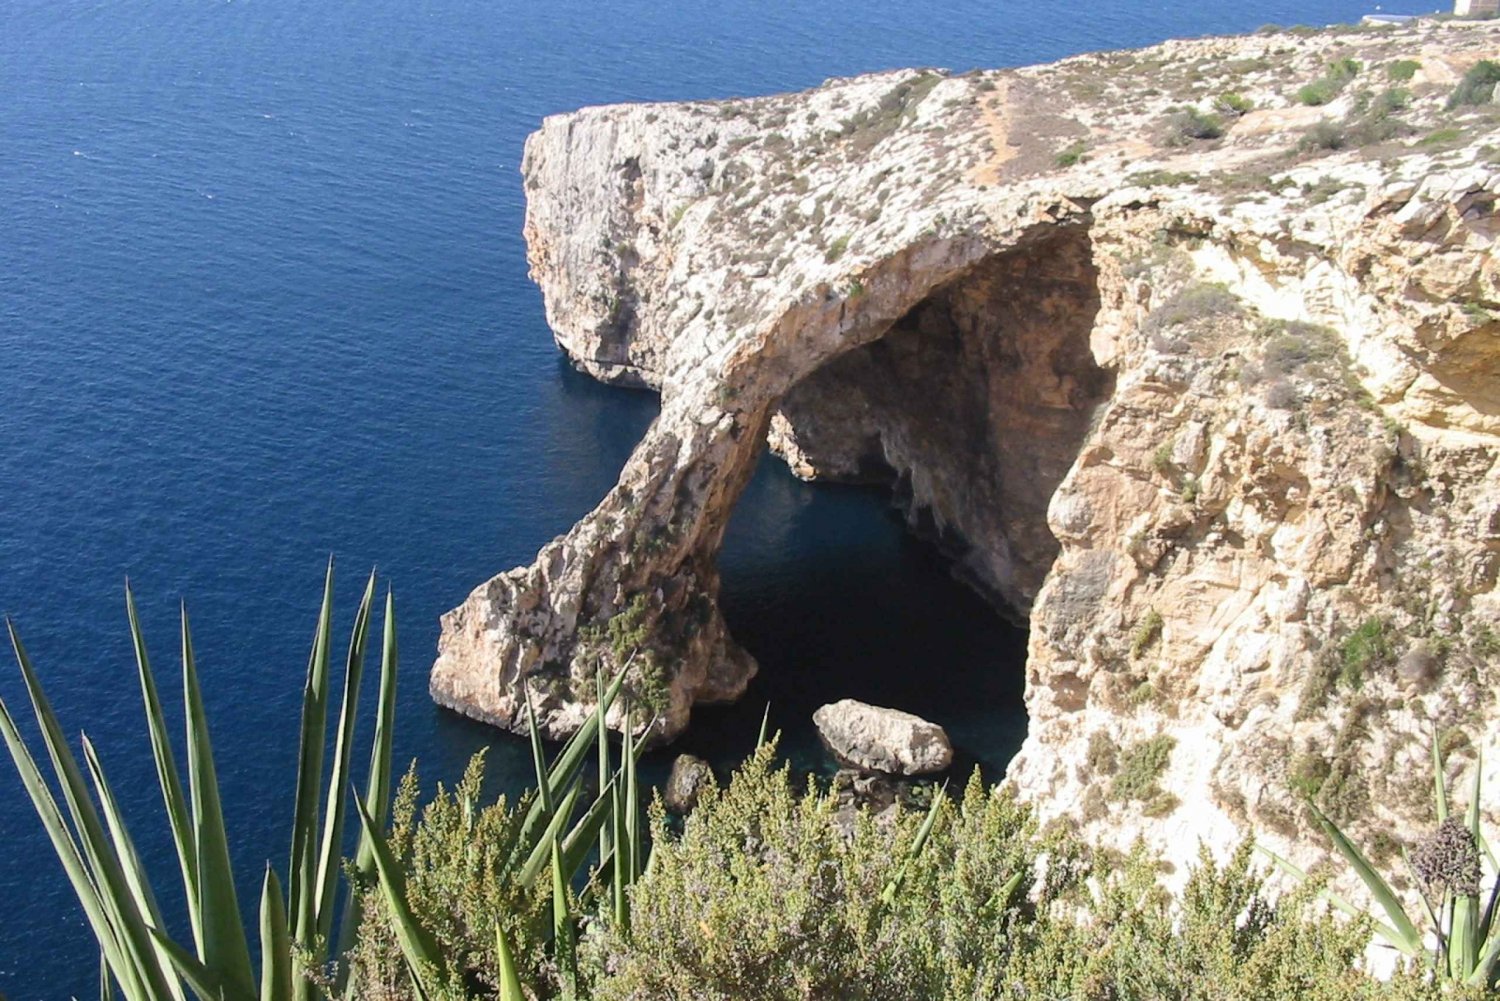 Blue-Grotto-Boat-Tour